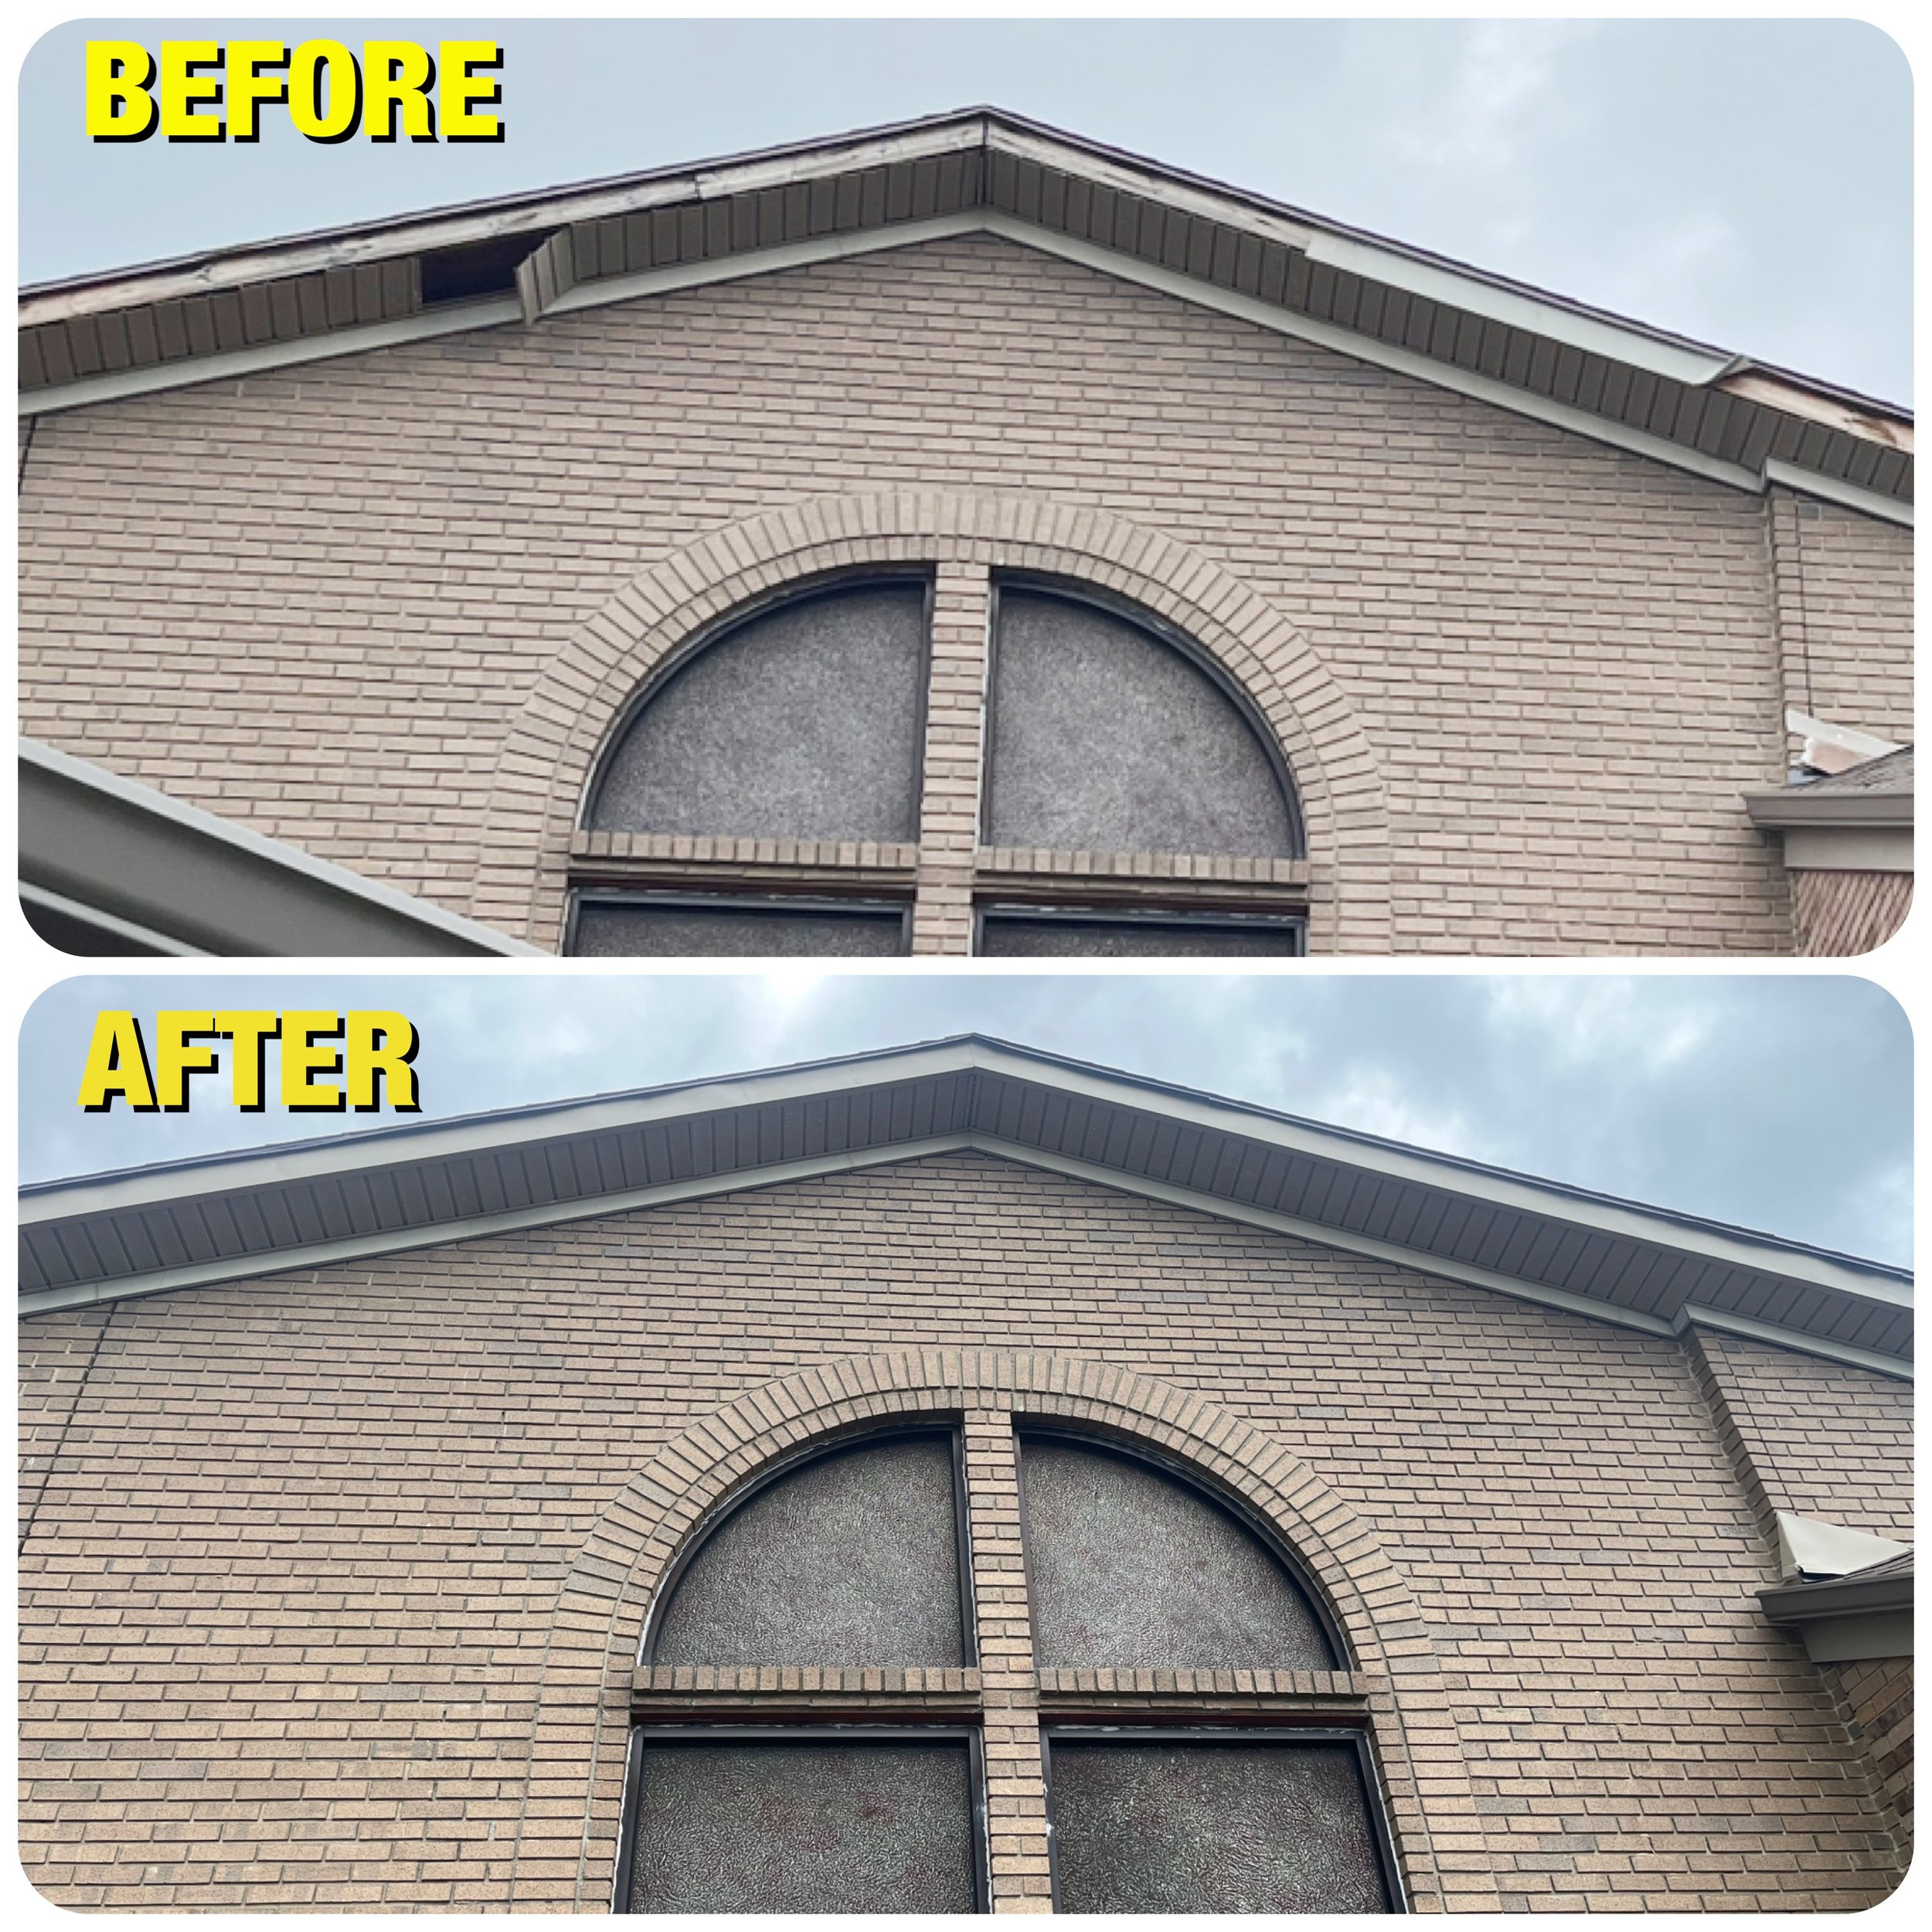 Facia and Soffit Before and After